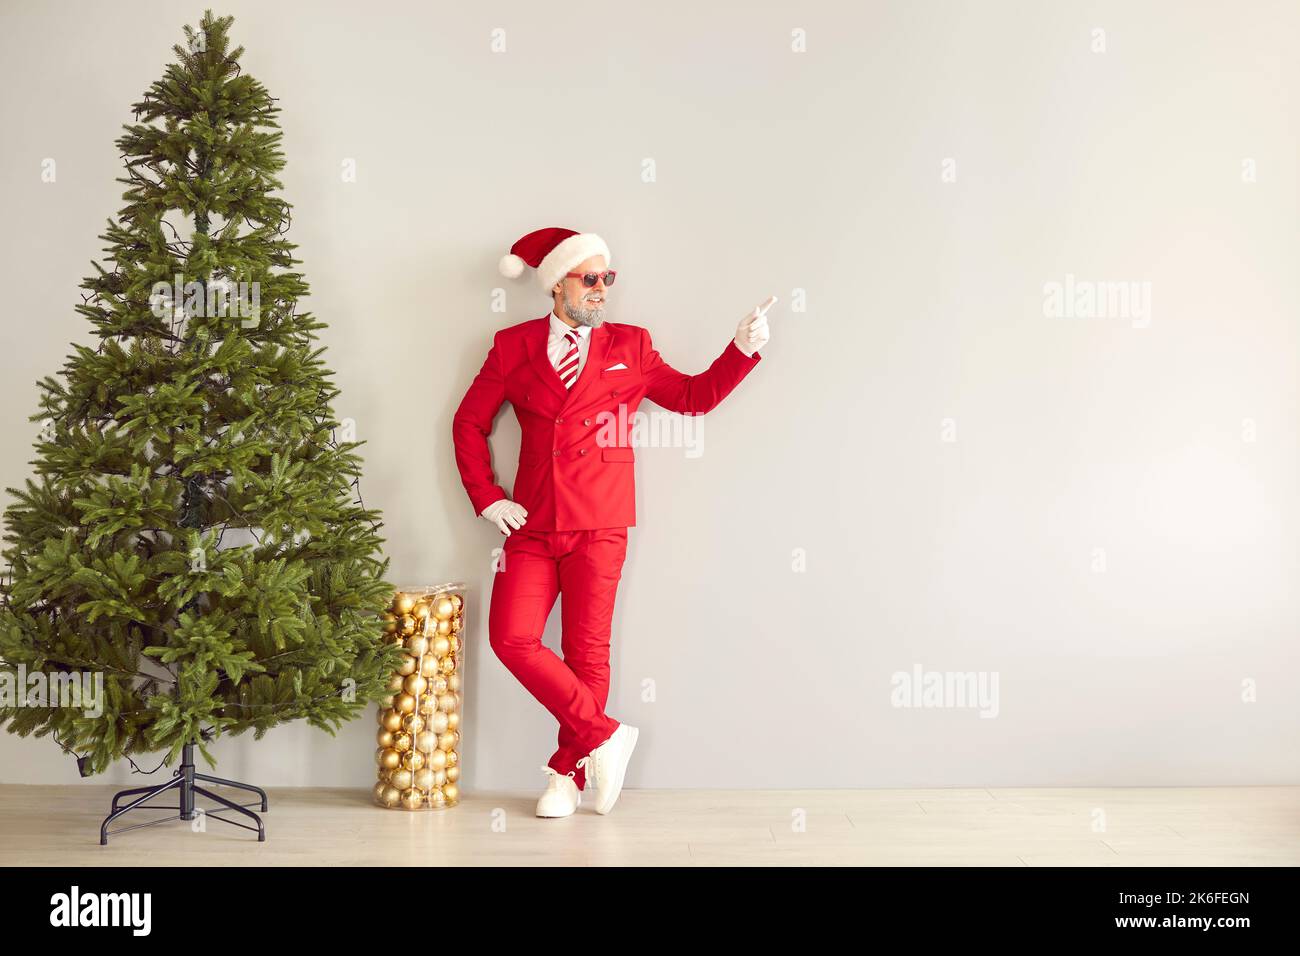 Funny man in red suit standing next to Christmas tree and pointing at copy space wall Stock Photo